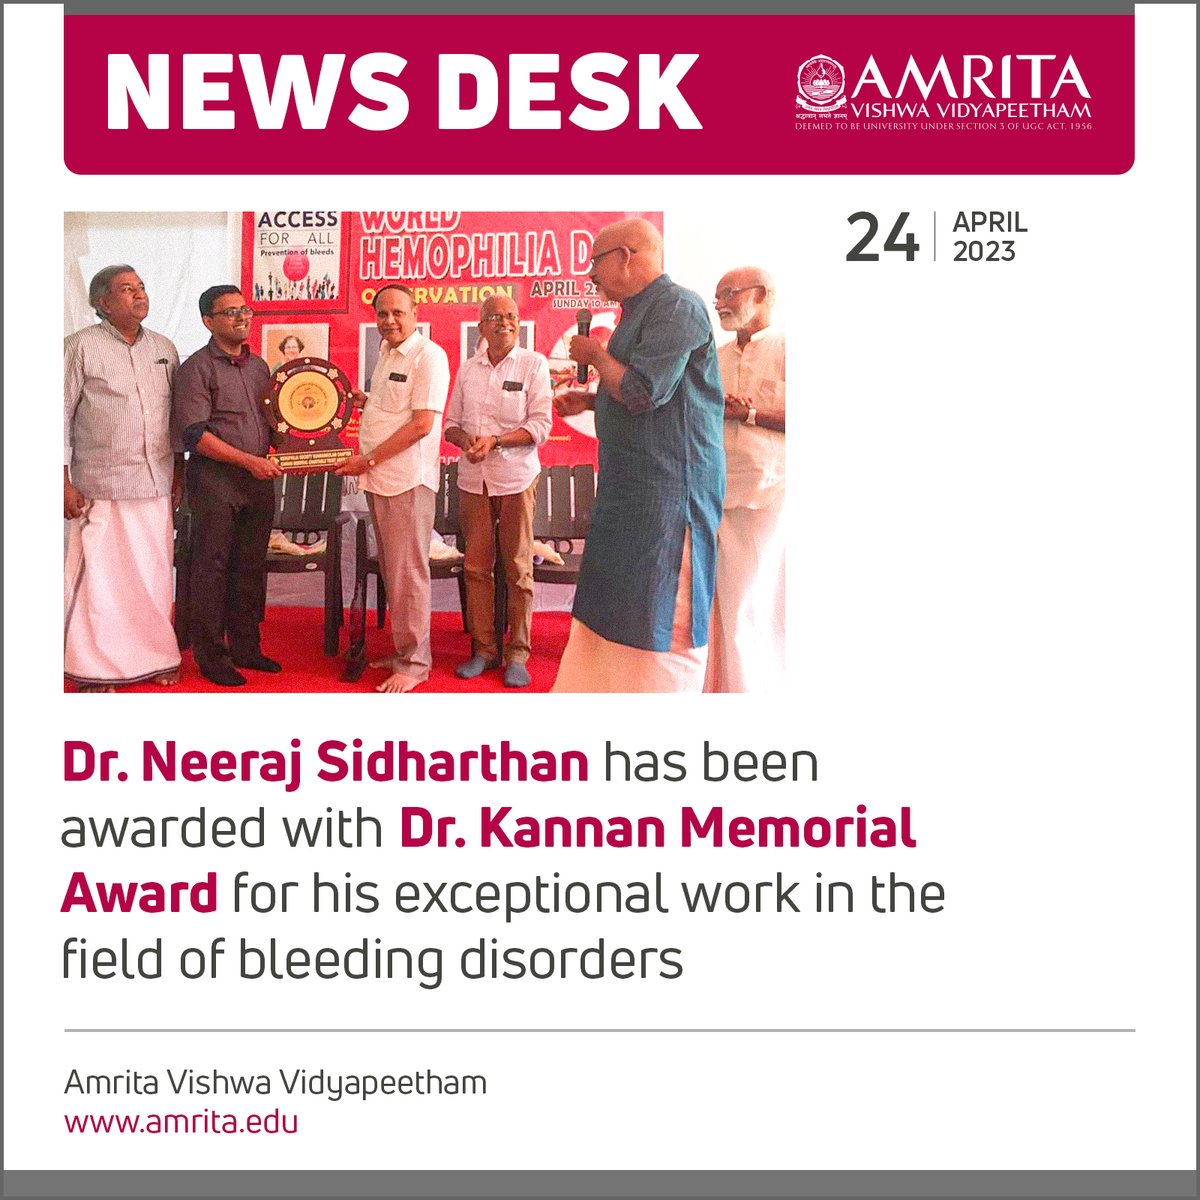 Our Amrita School of Medicine's Dr. Neeraj Sidharthan, has been awarded with Dr. Kannan Memorial Award for his exceptional work in the field of bleeding disorders.
Congrats Dr. Neeraj! 
#Amrita #AmritaUniversity #Medicine #BleedingDisorder #AmritaHospital #EmbraceGoodHealth